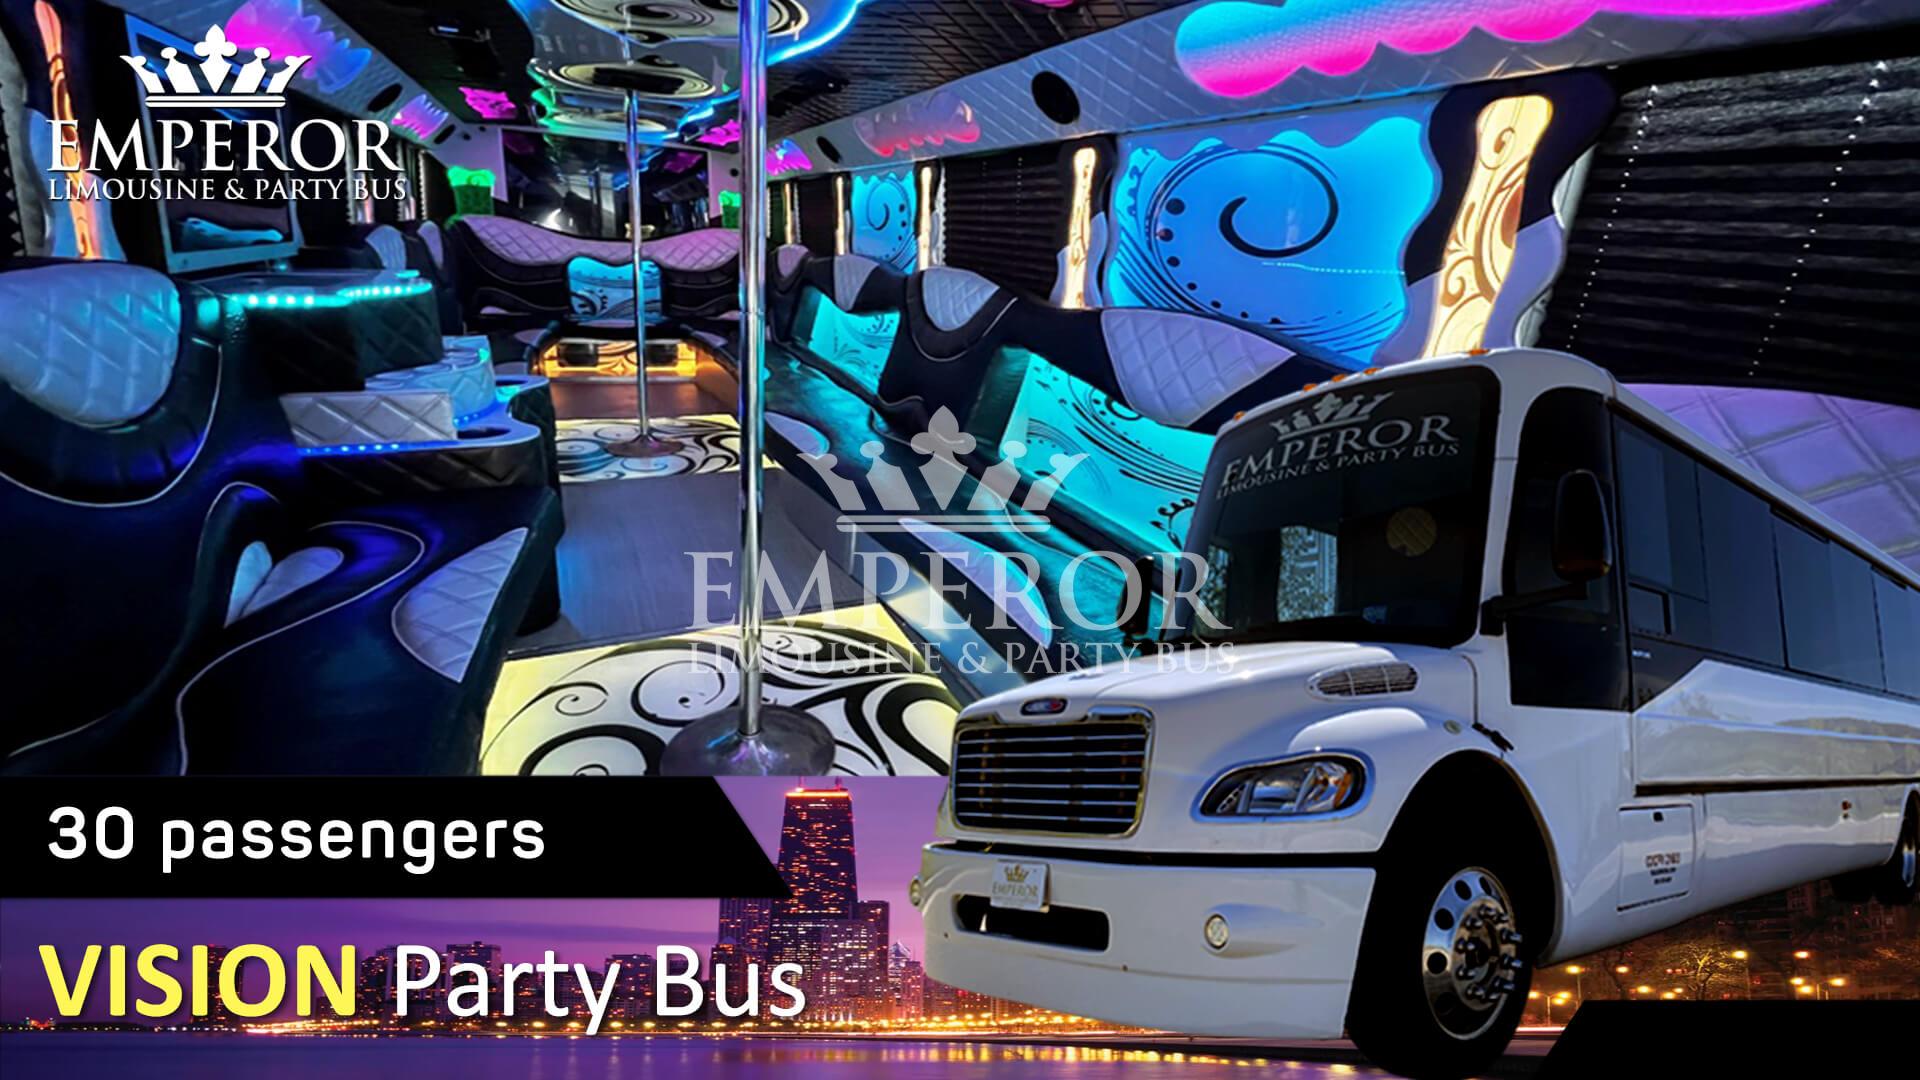 Bolingbrook party bus - Vision Edition